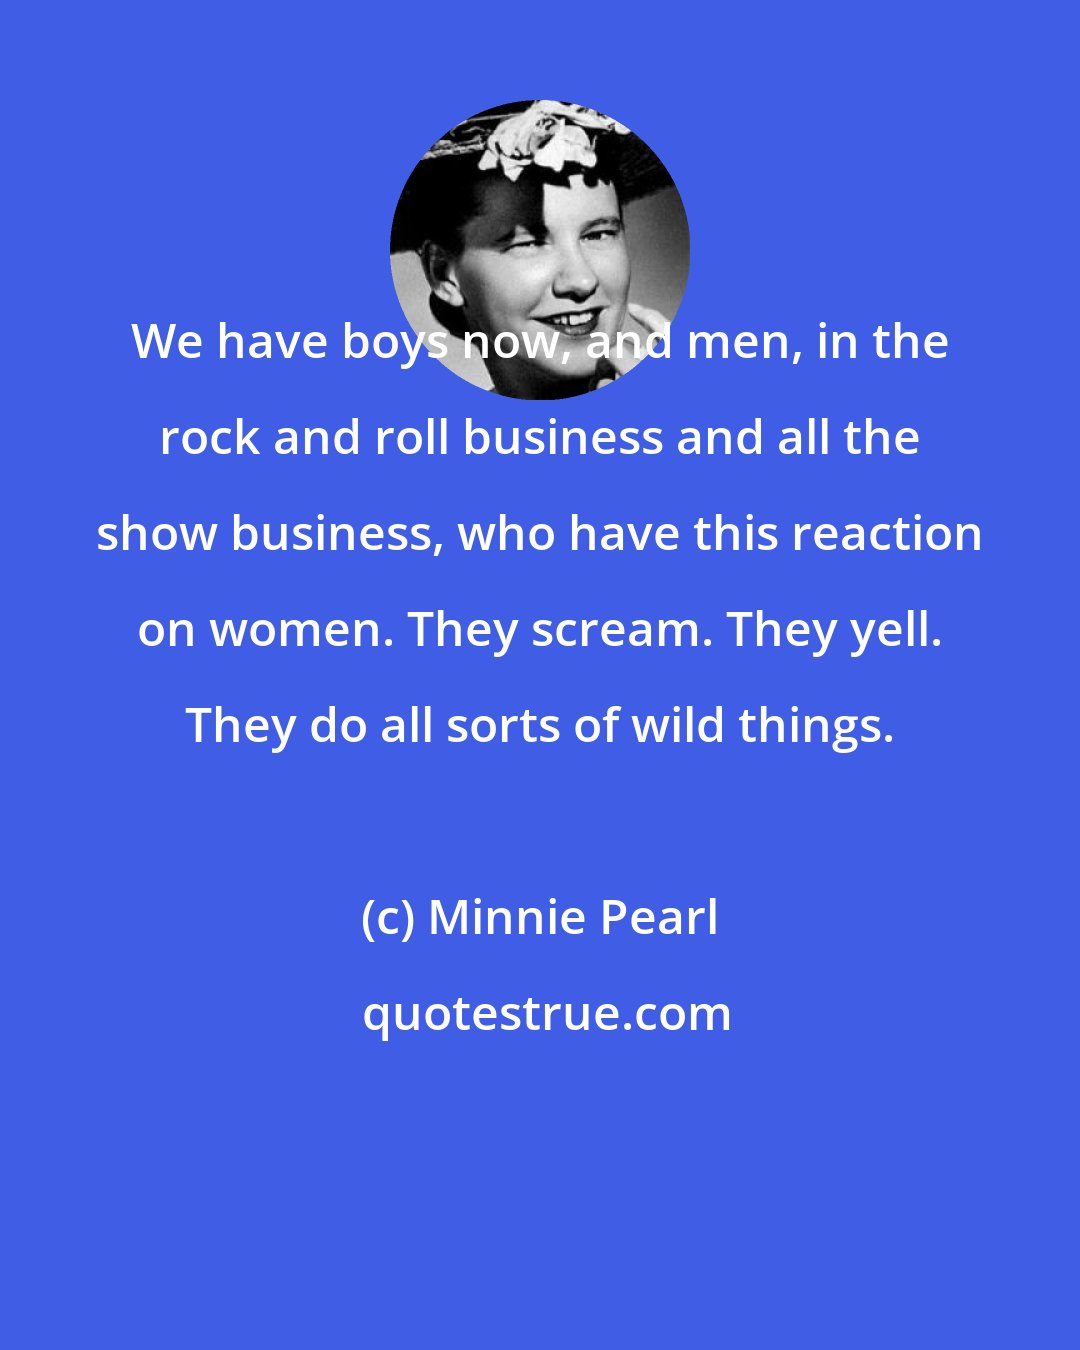 Minnie Pearl: We have boys now, and men, in the rock and roll business and all the show business, who have this reaction on women. They scream. They yell. They do all sorts of wild things.